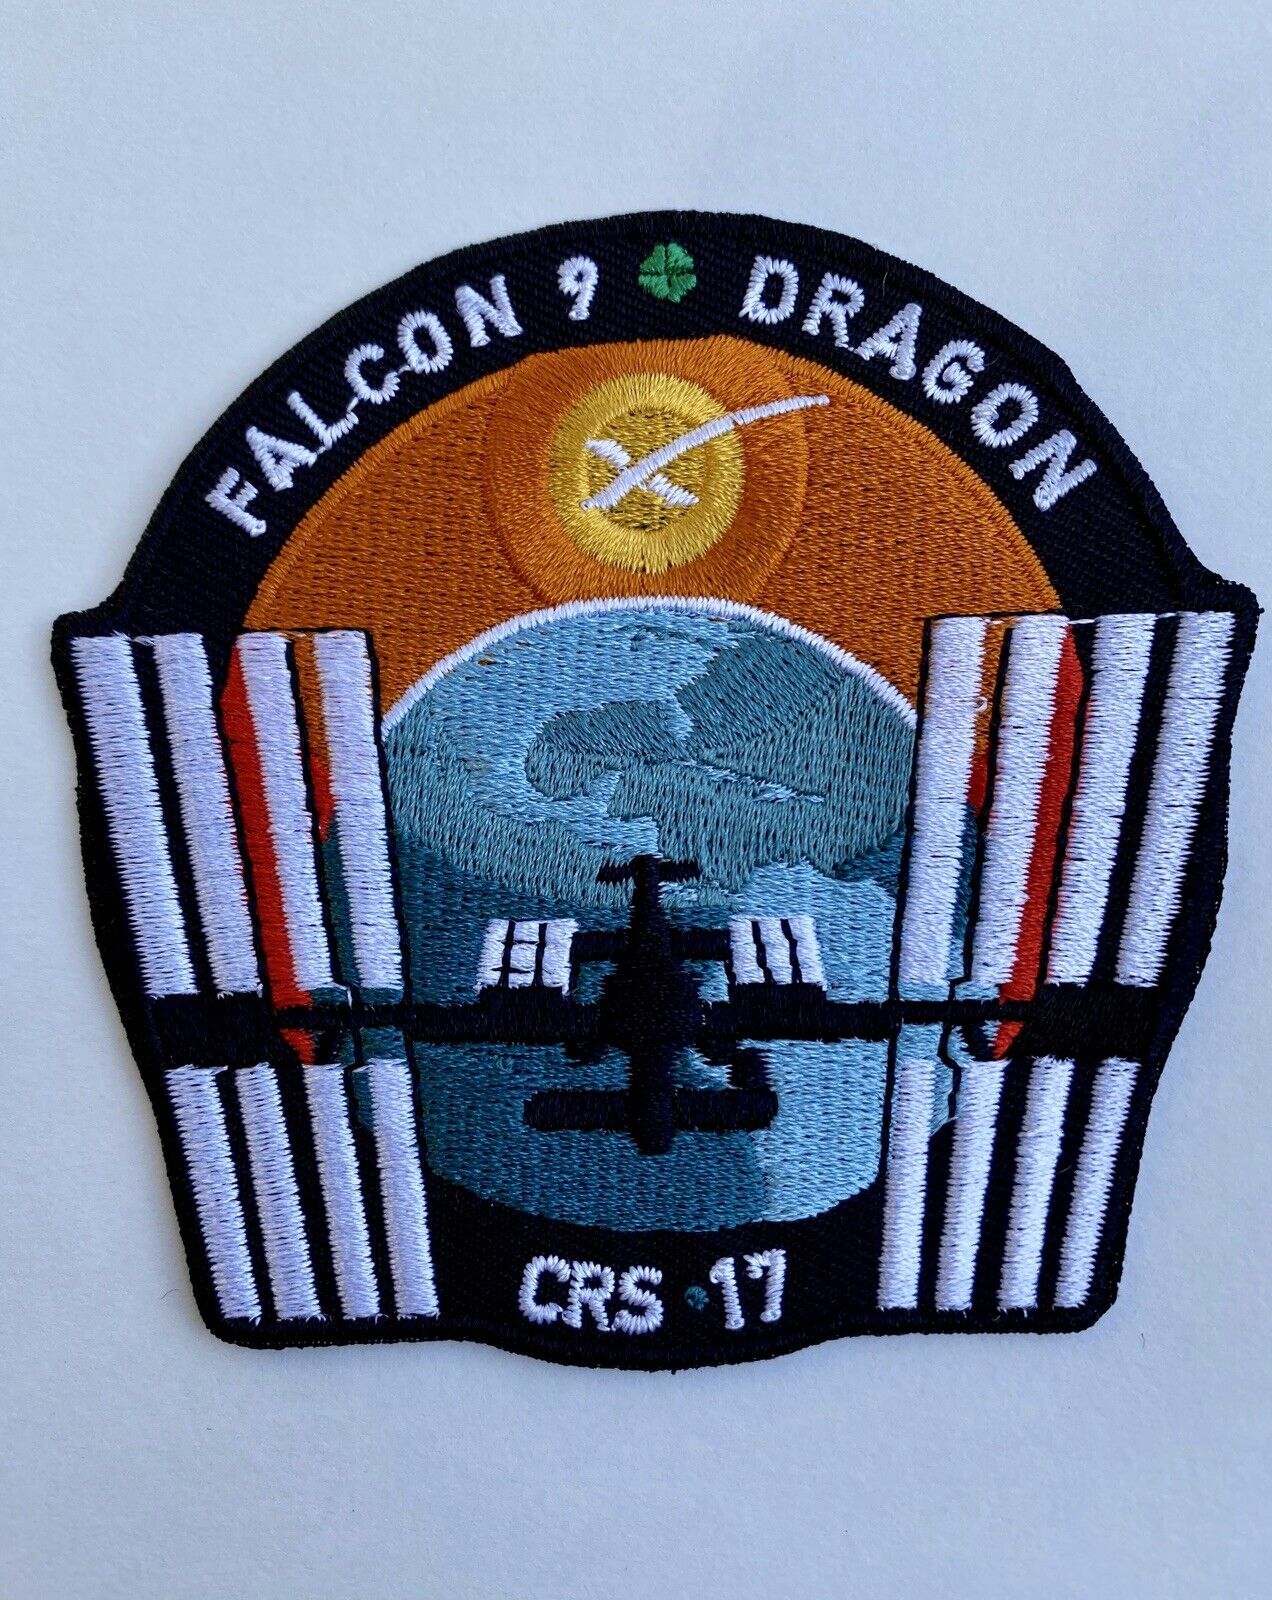 CRS-17 - SPACEX FALCON-9 DRAGON NASA RESUPPLY Mission PATCH 3.5” Iron On